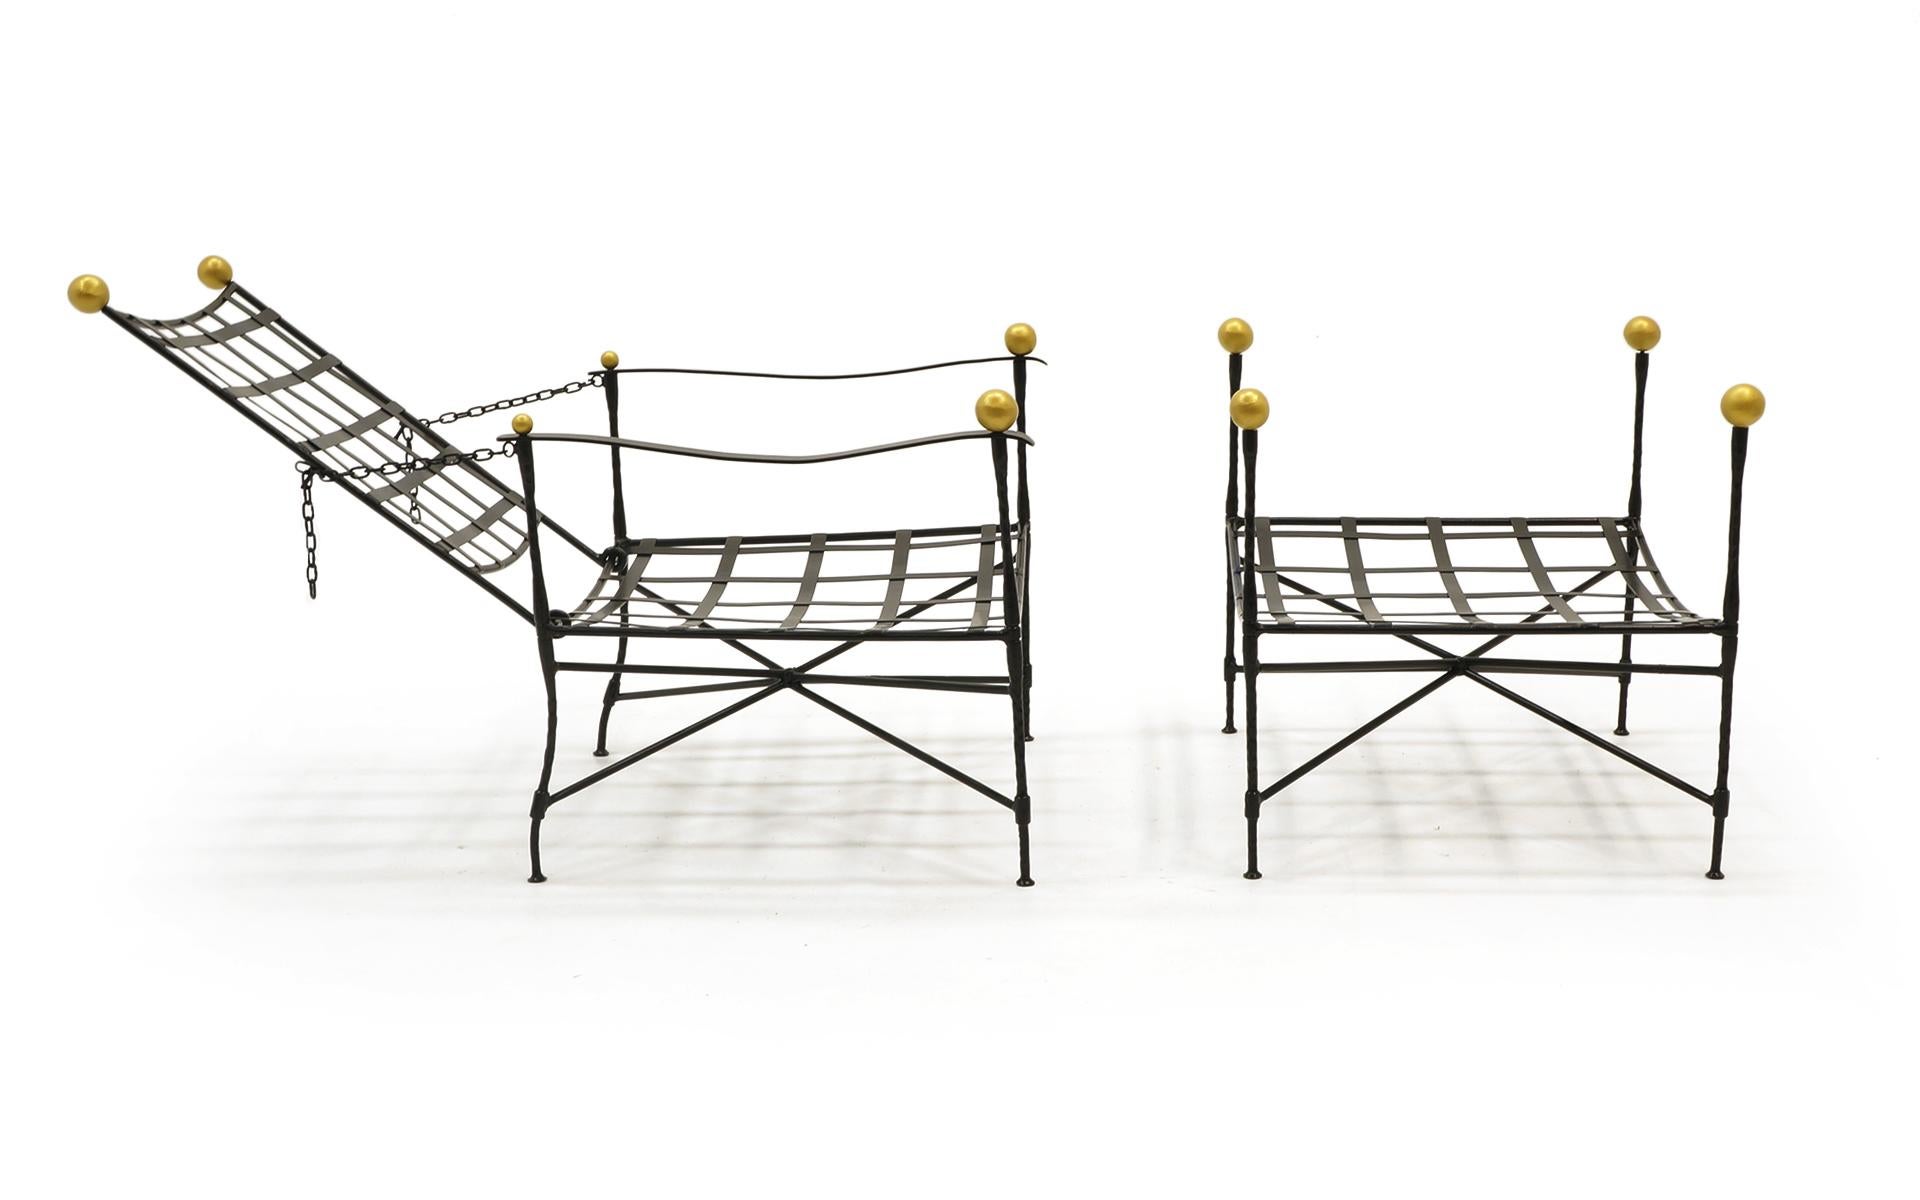 Mid-Century Modern Outdoor Lounge Chair & Ottoman by Mario Papperzini for John Salterini. Restored.